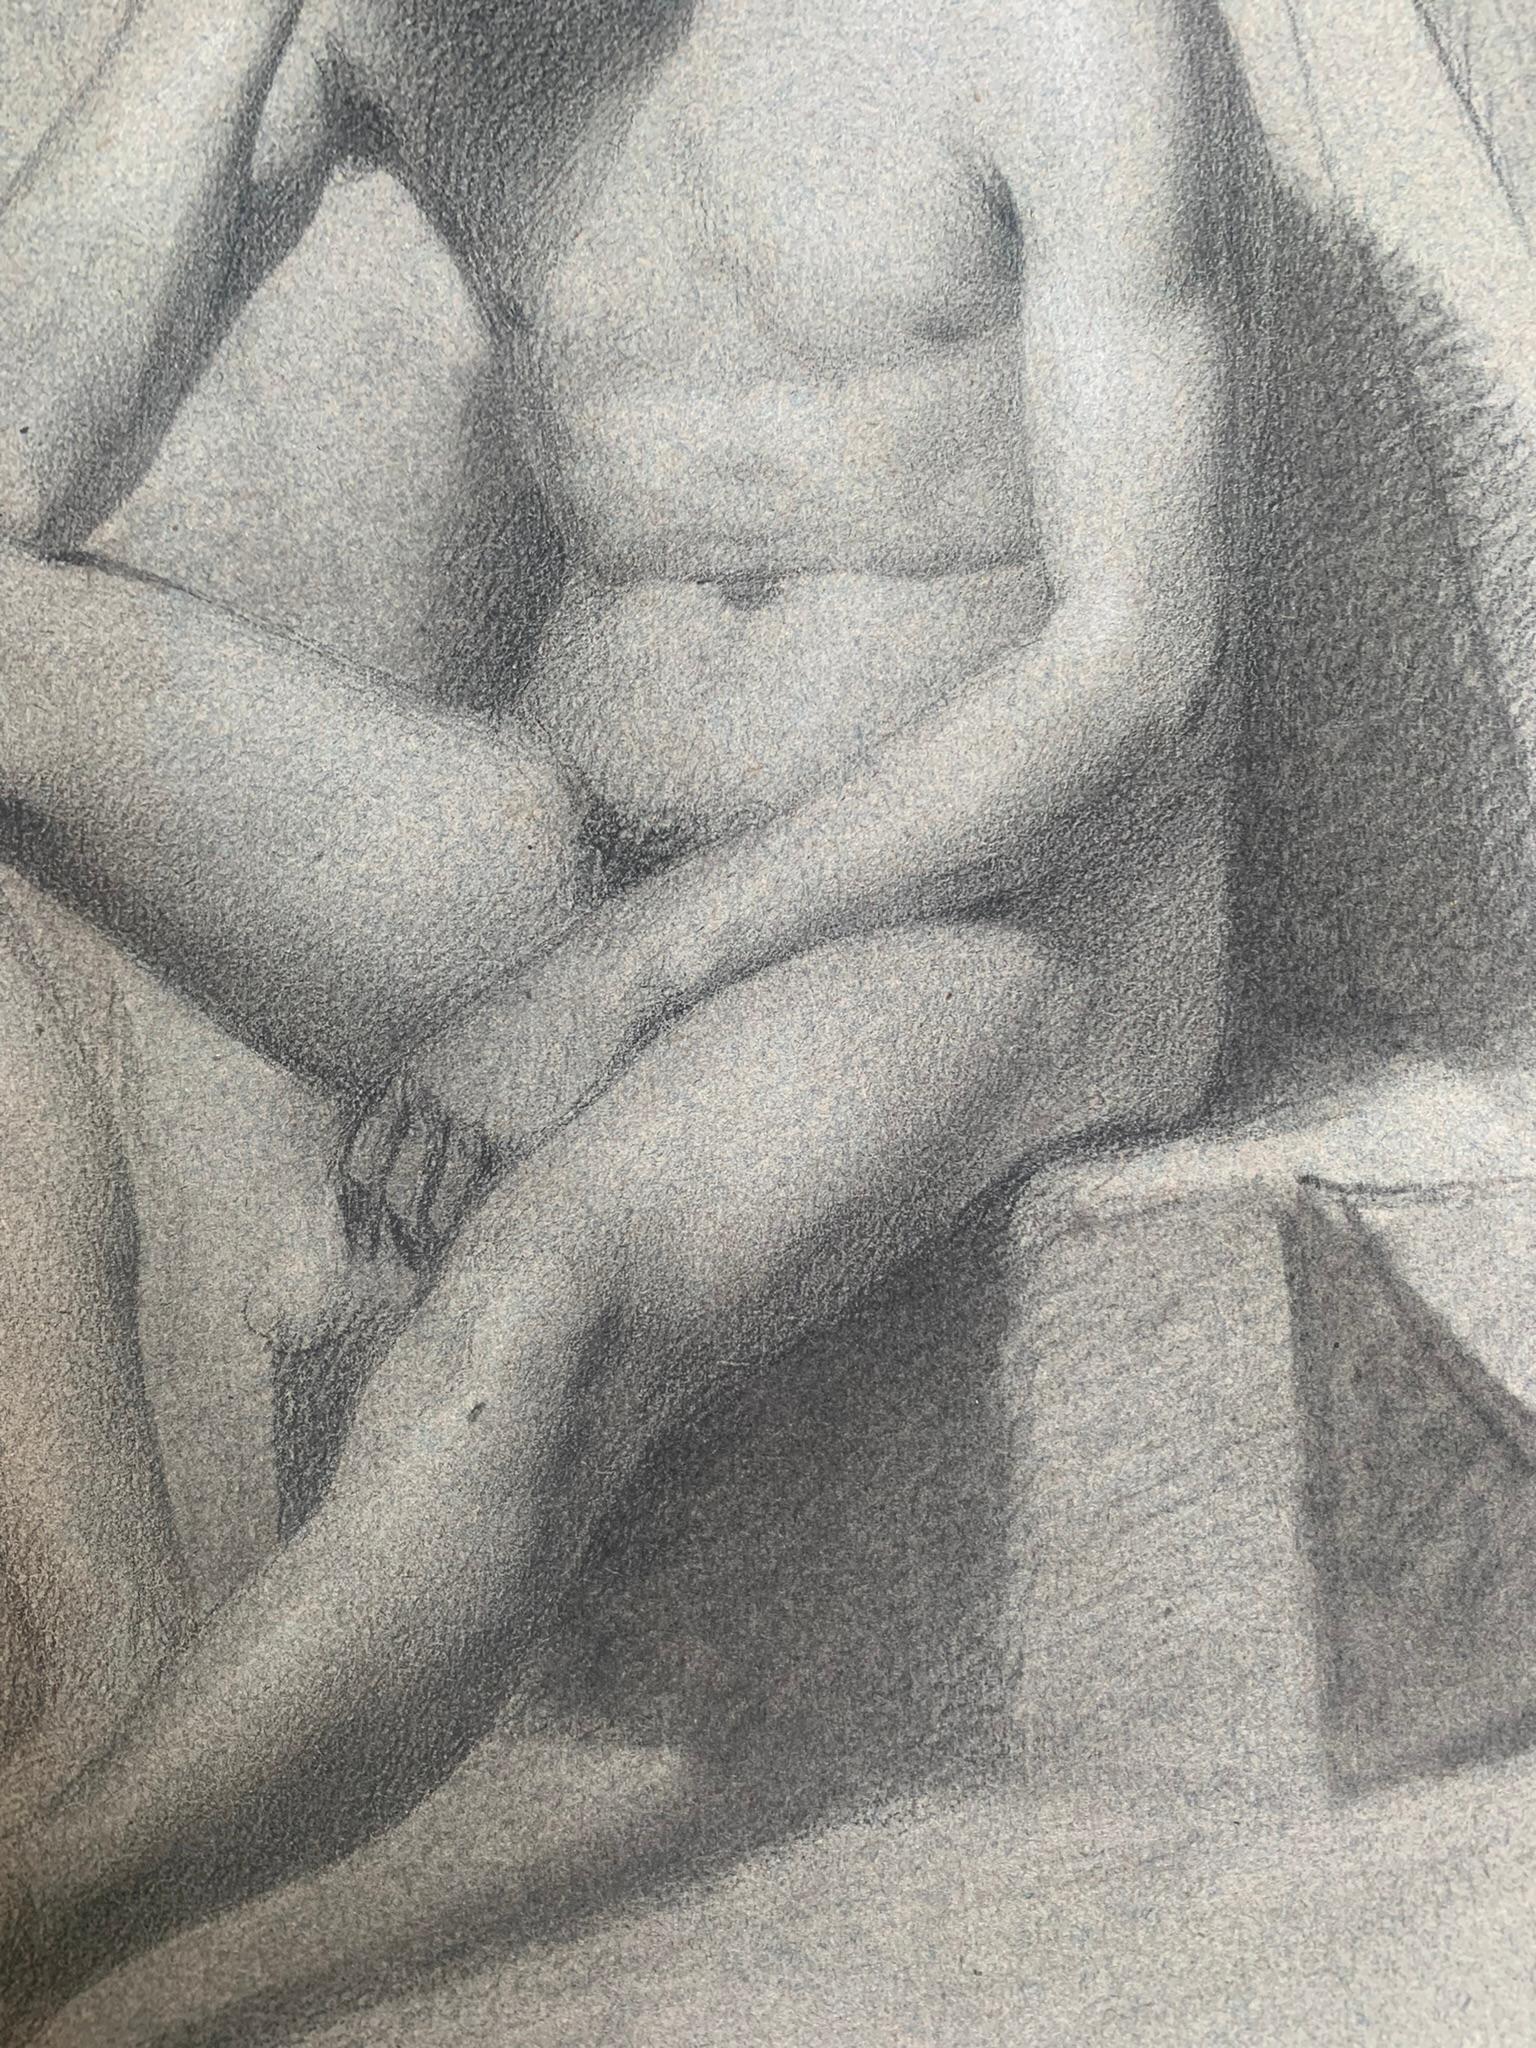 Academic Drawing. Figure Study of Young Sitting Nude Man. 19th Century. For Sale 1